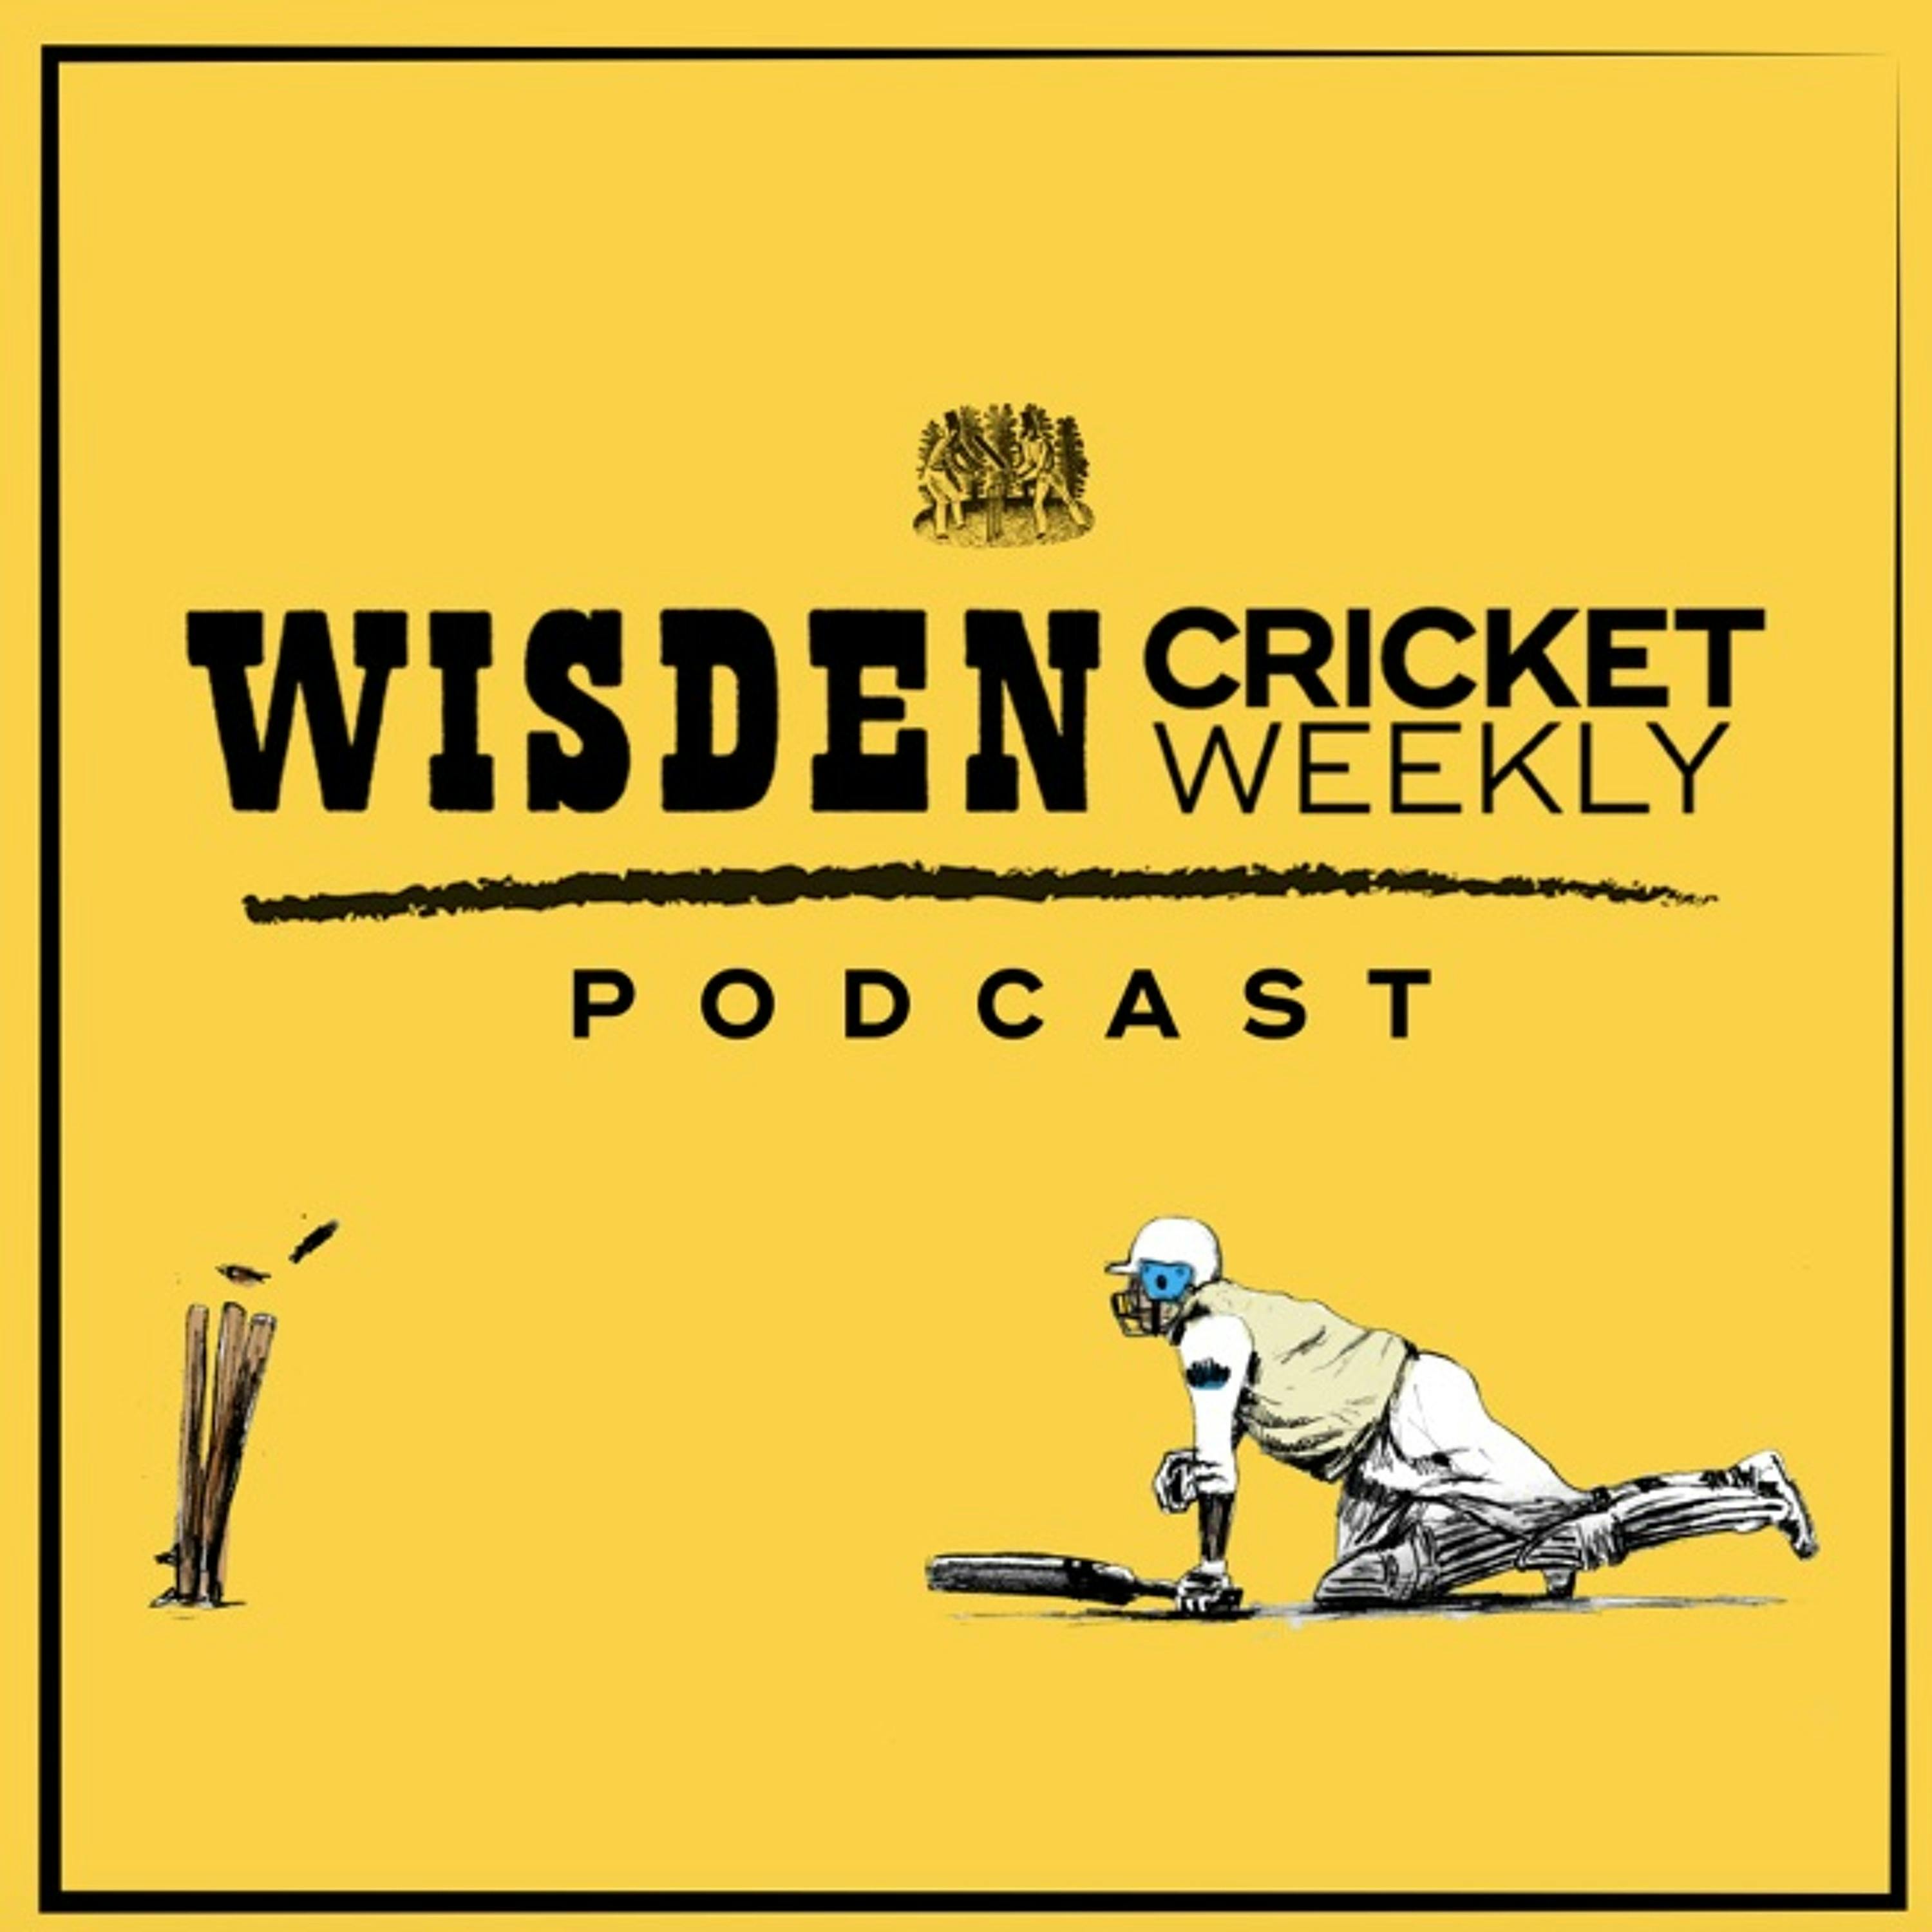 Episode 10 – Good blokes, bad blokes and the IPL Auction